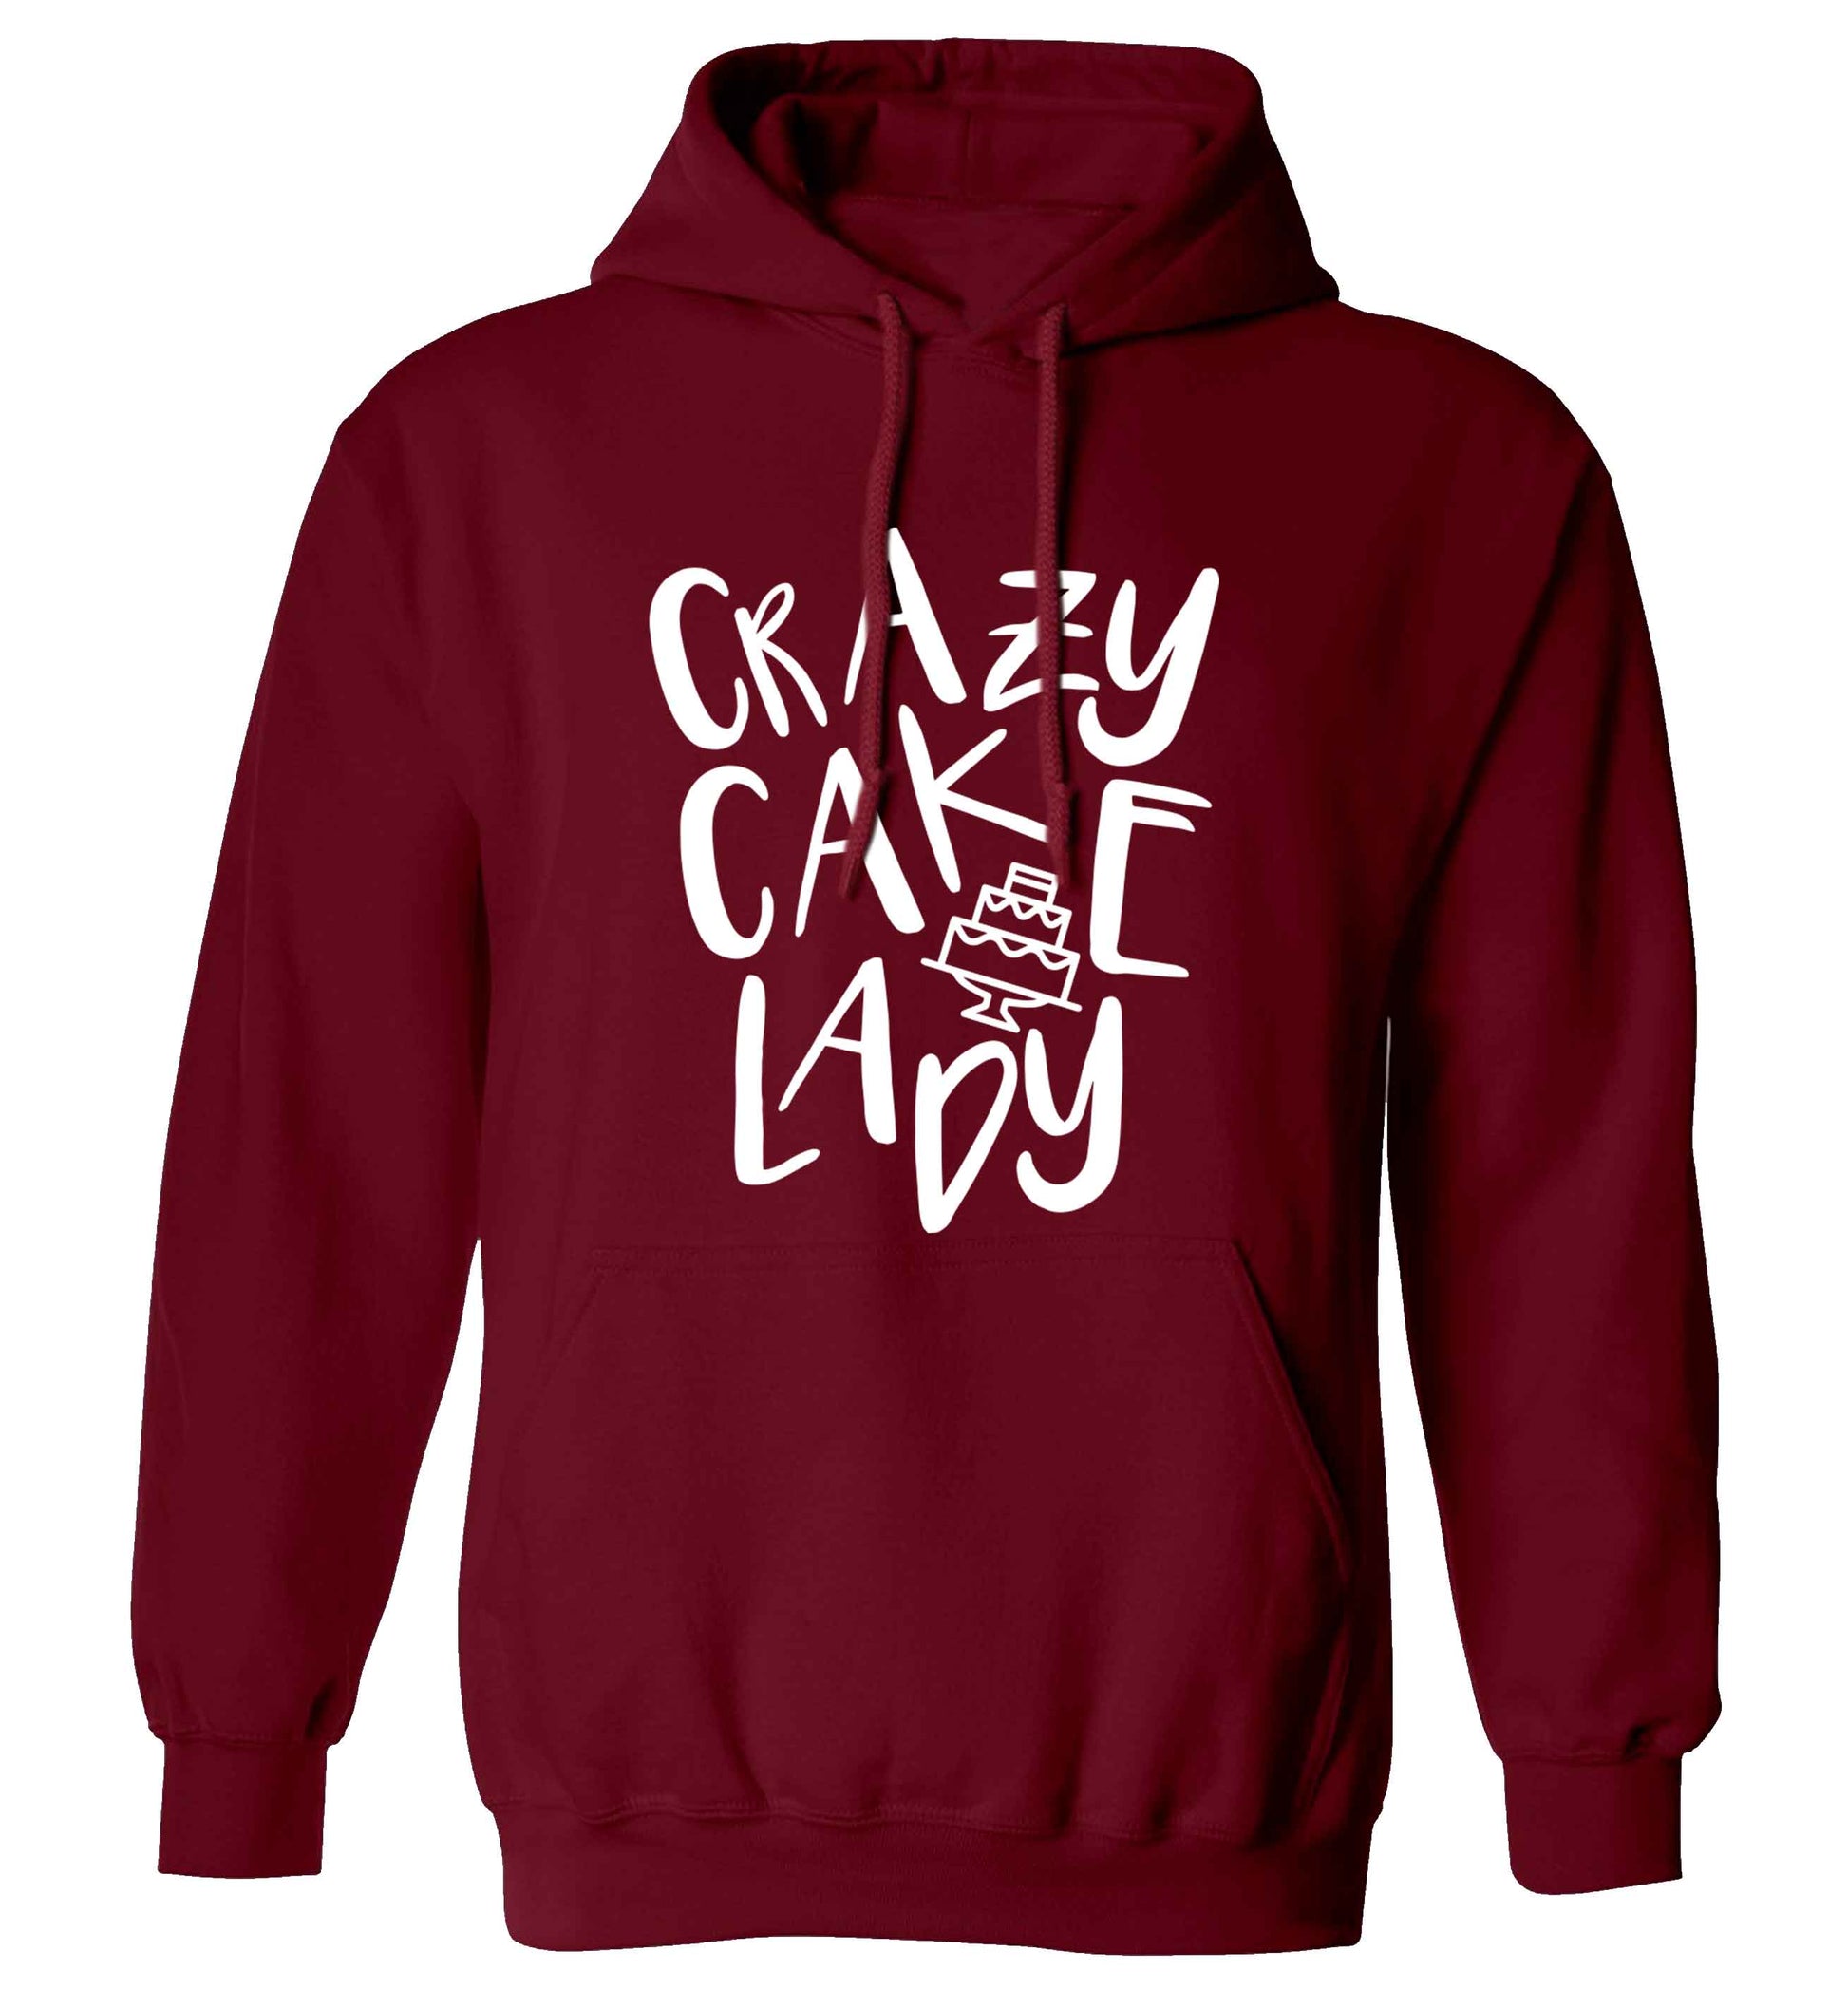 Crazy cake lady adults unisex maroon hoodie 2XL